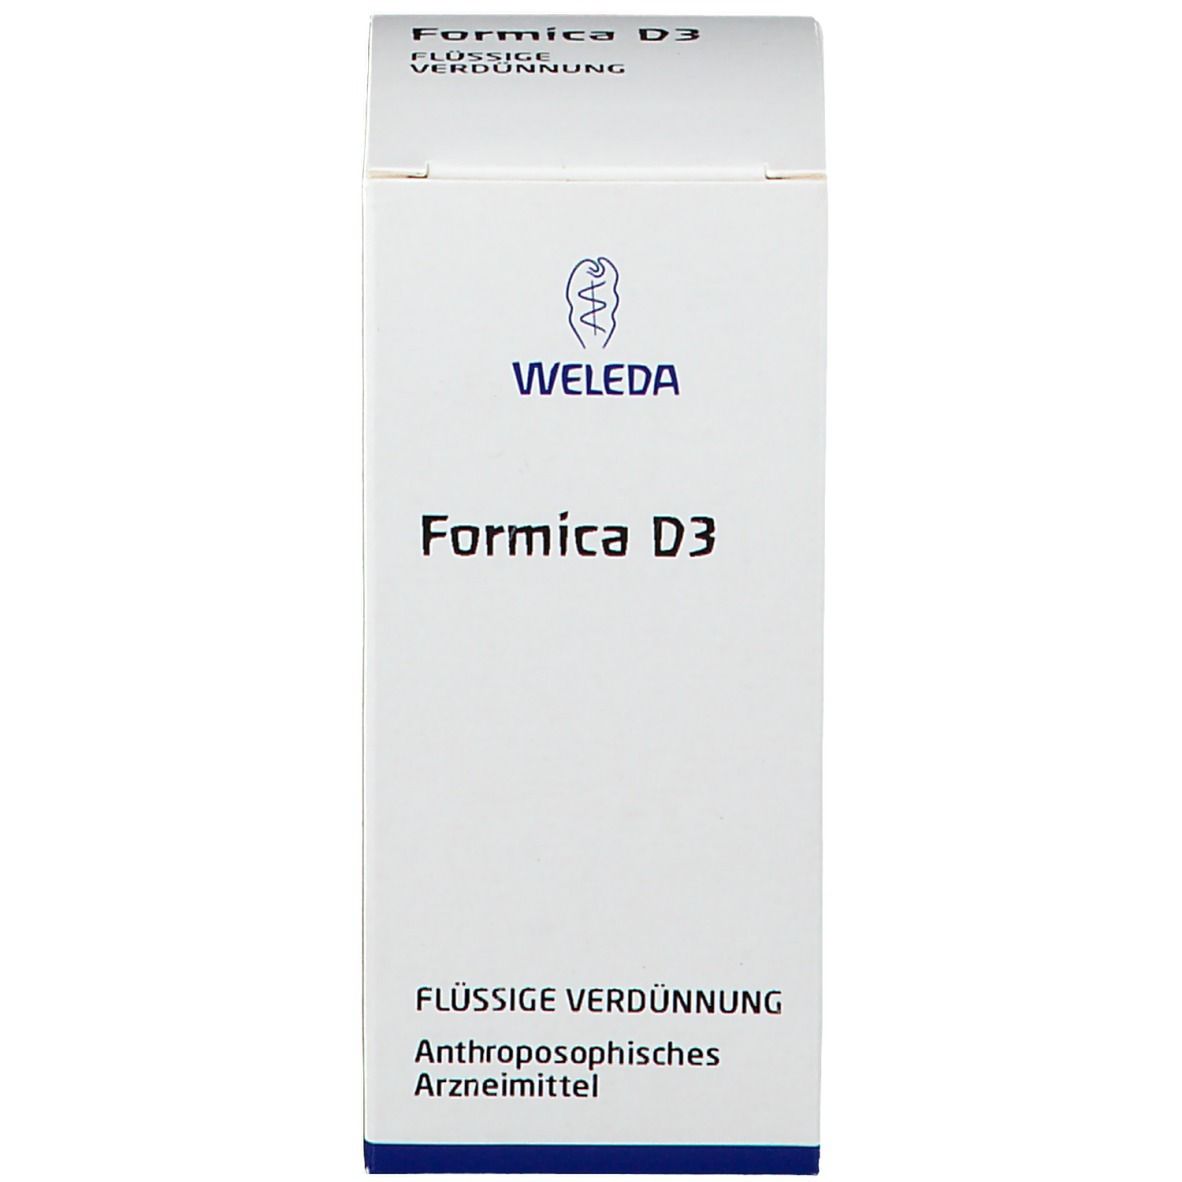 Formica D3 Dilution